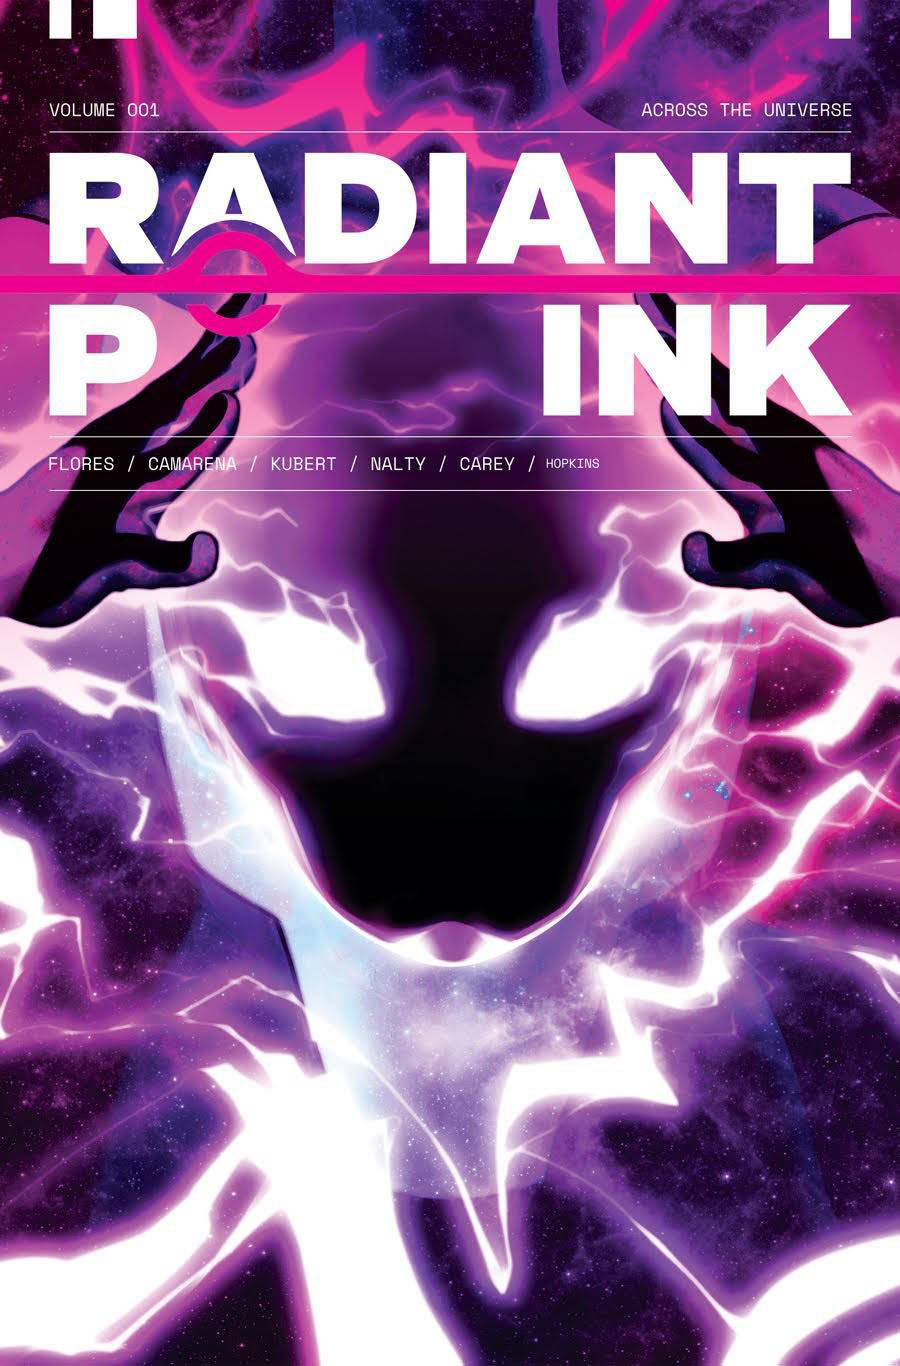 Radiant Pink Vol 1 Across The Universe TP SDCC 2023 Exclusive Variant Cover (Limit 1 Per Customer)